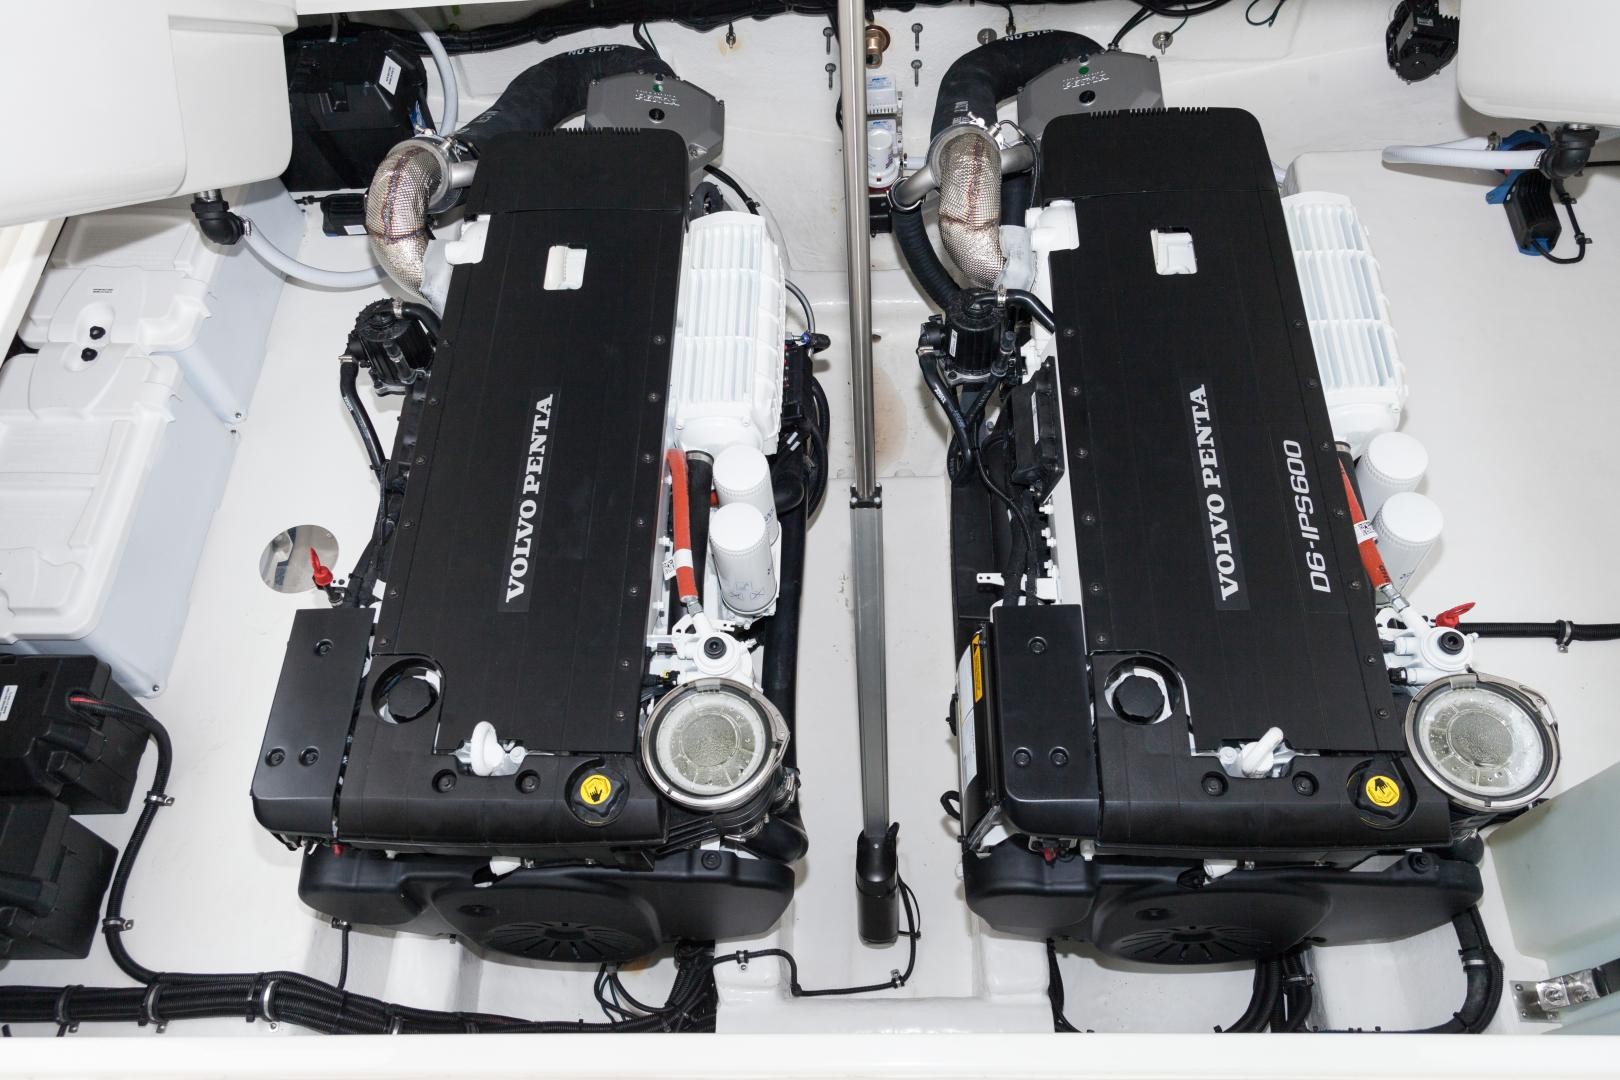 Twin Volvo Penta D6 engines onboard the Riviera 445 SUV